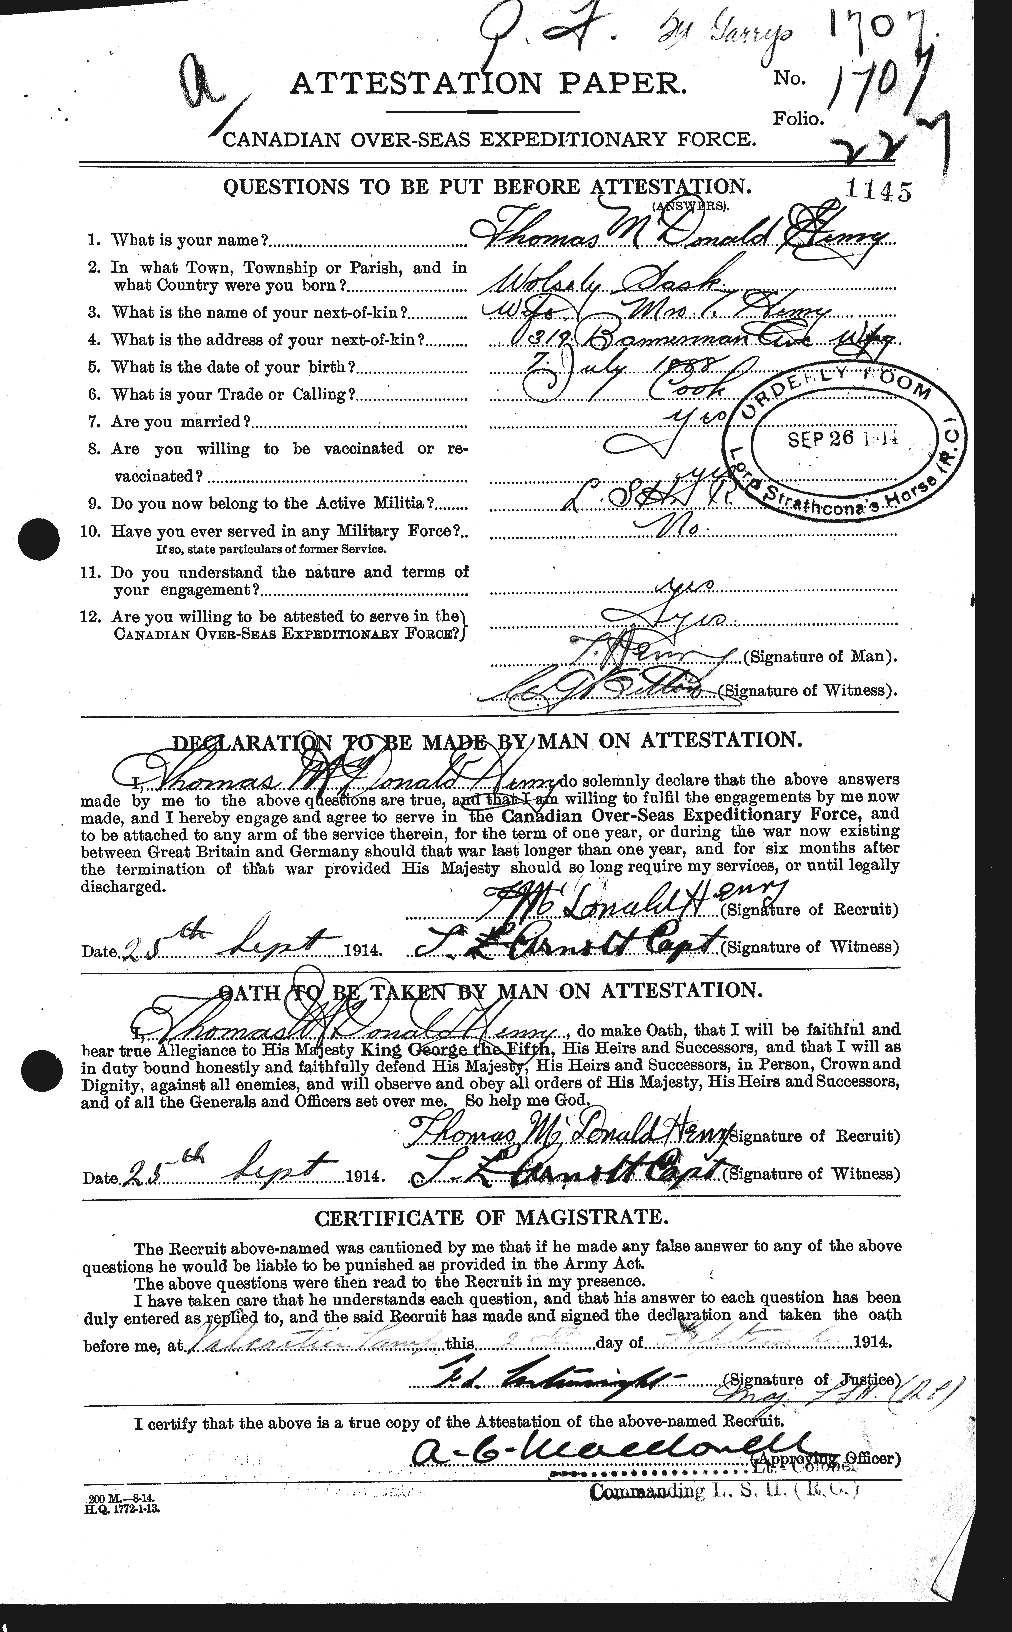 Personnel Records of the First World War - CEF 387739a